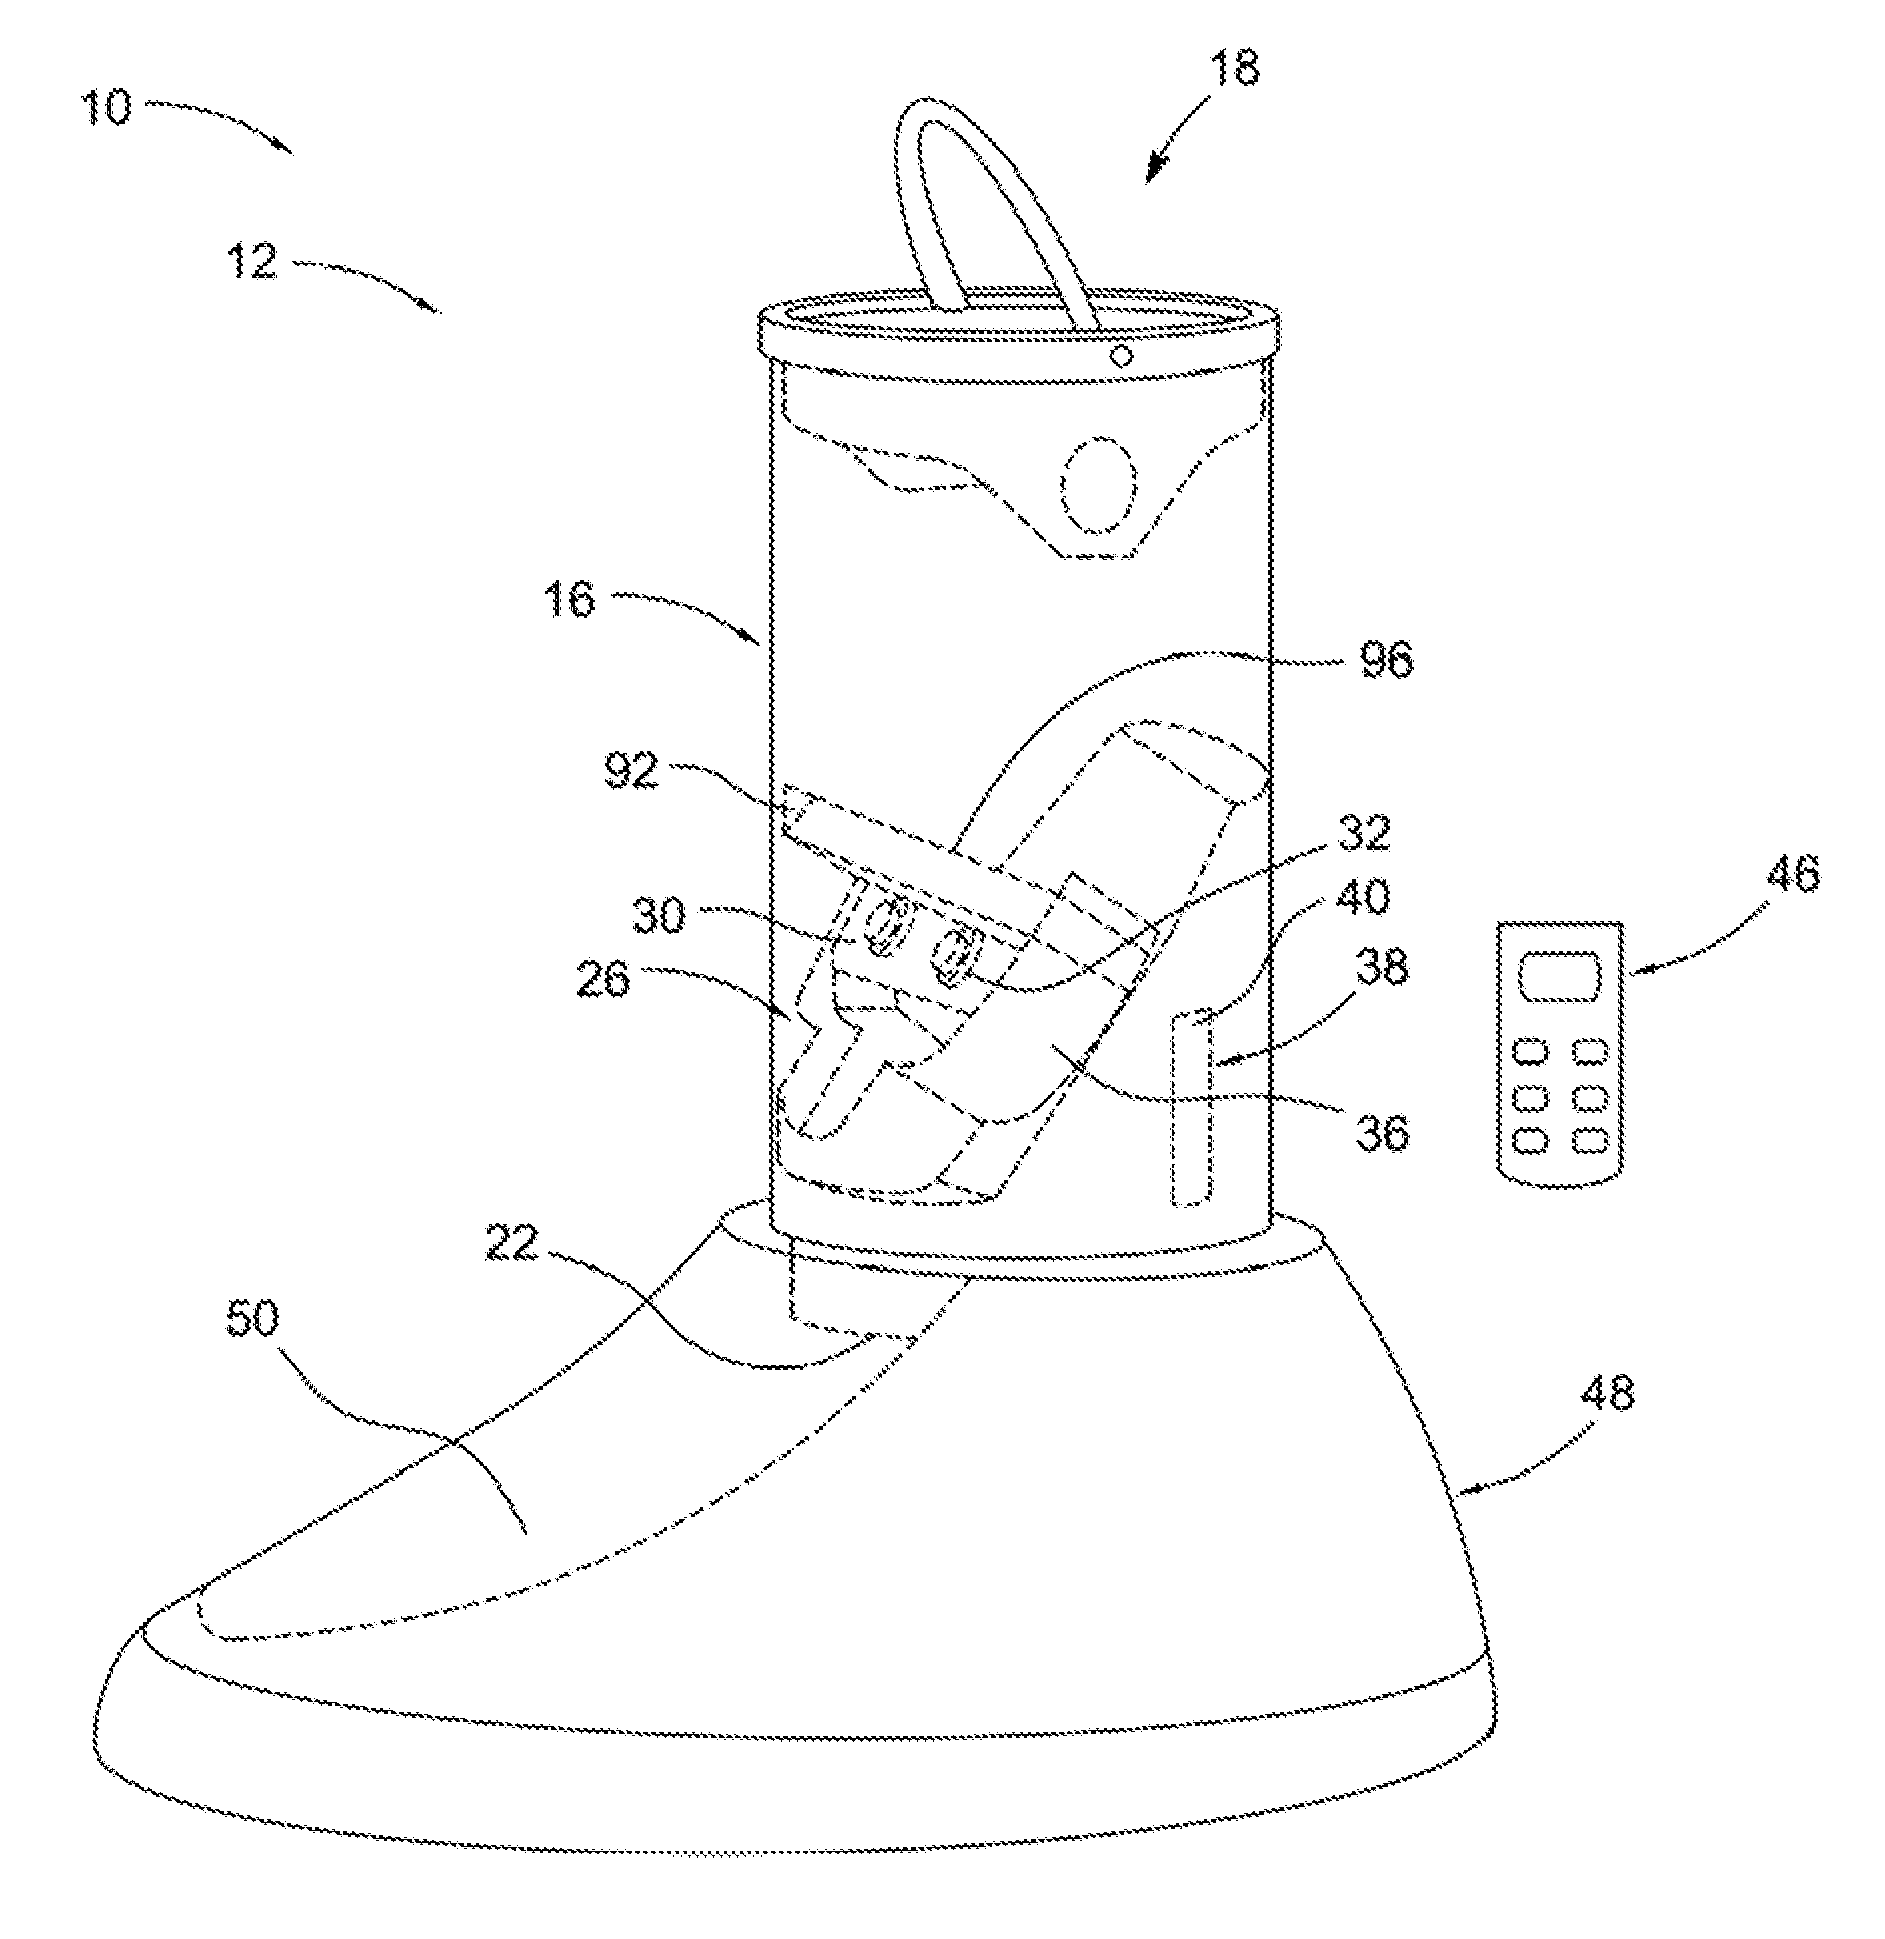 Animal training device and methods therefor